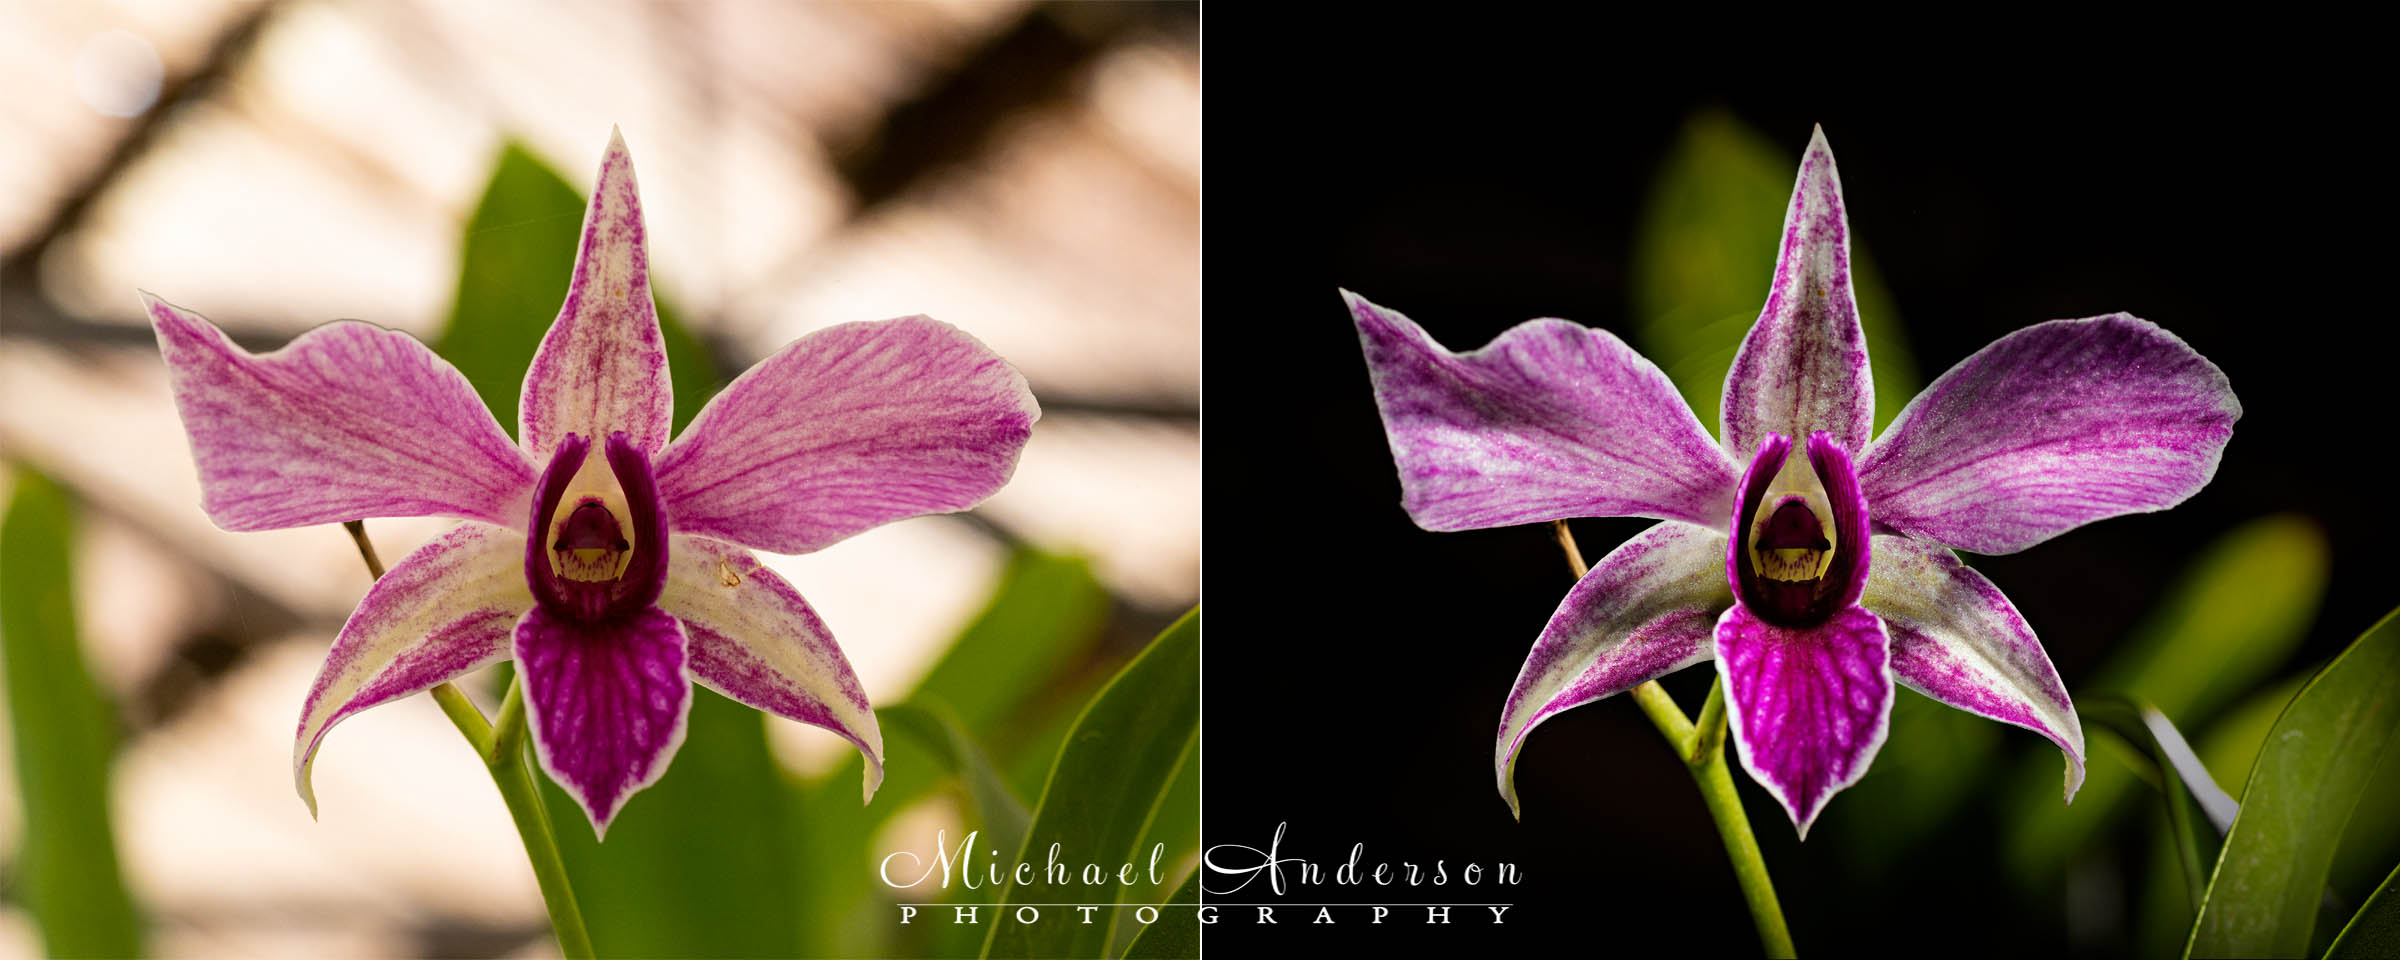 A before and after photograph of the stunning Dendrobium “Fire Wings” Orchid.